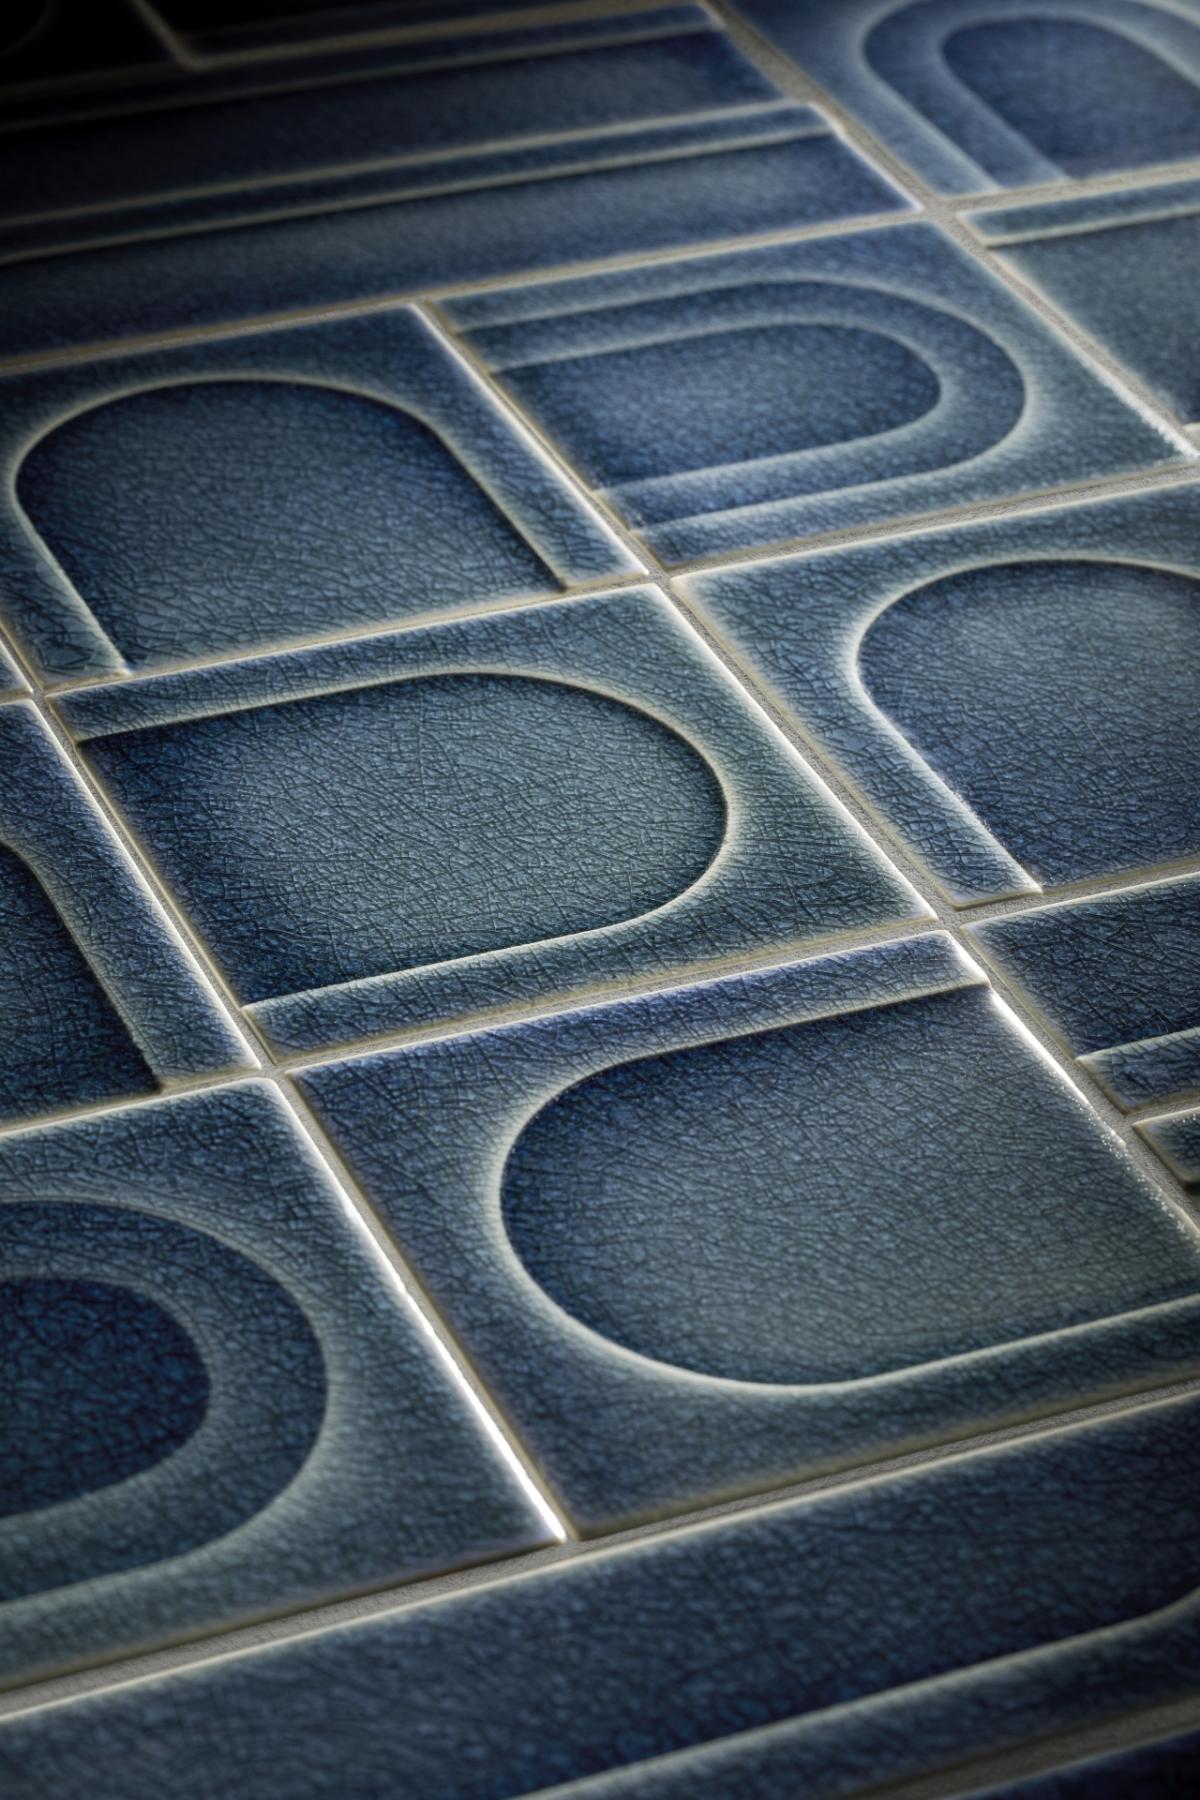 handcrafted sustainable tiles from Kohler WasteLAB